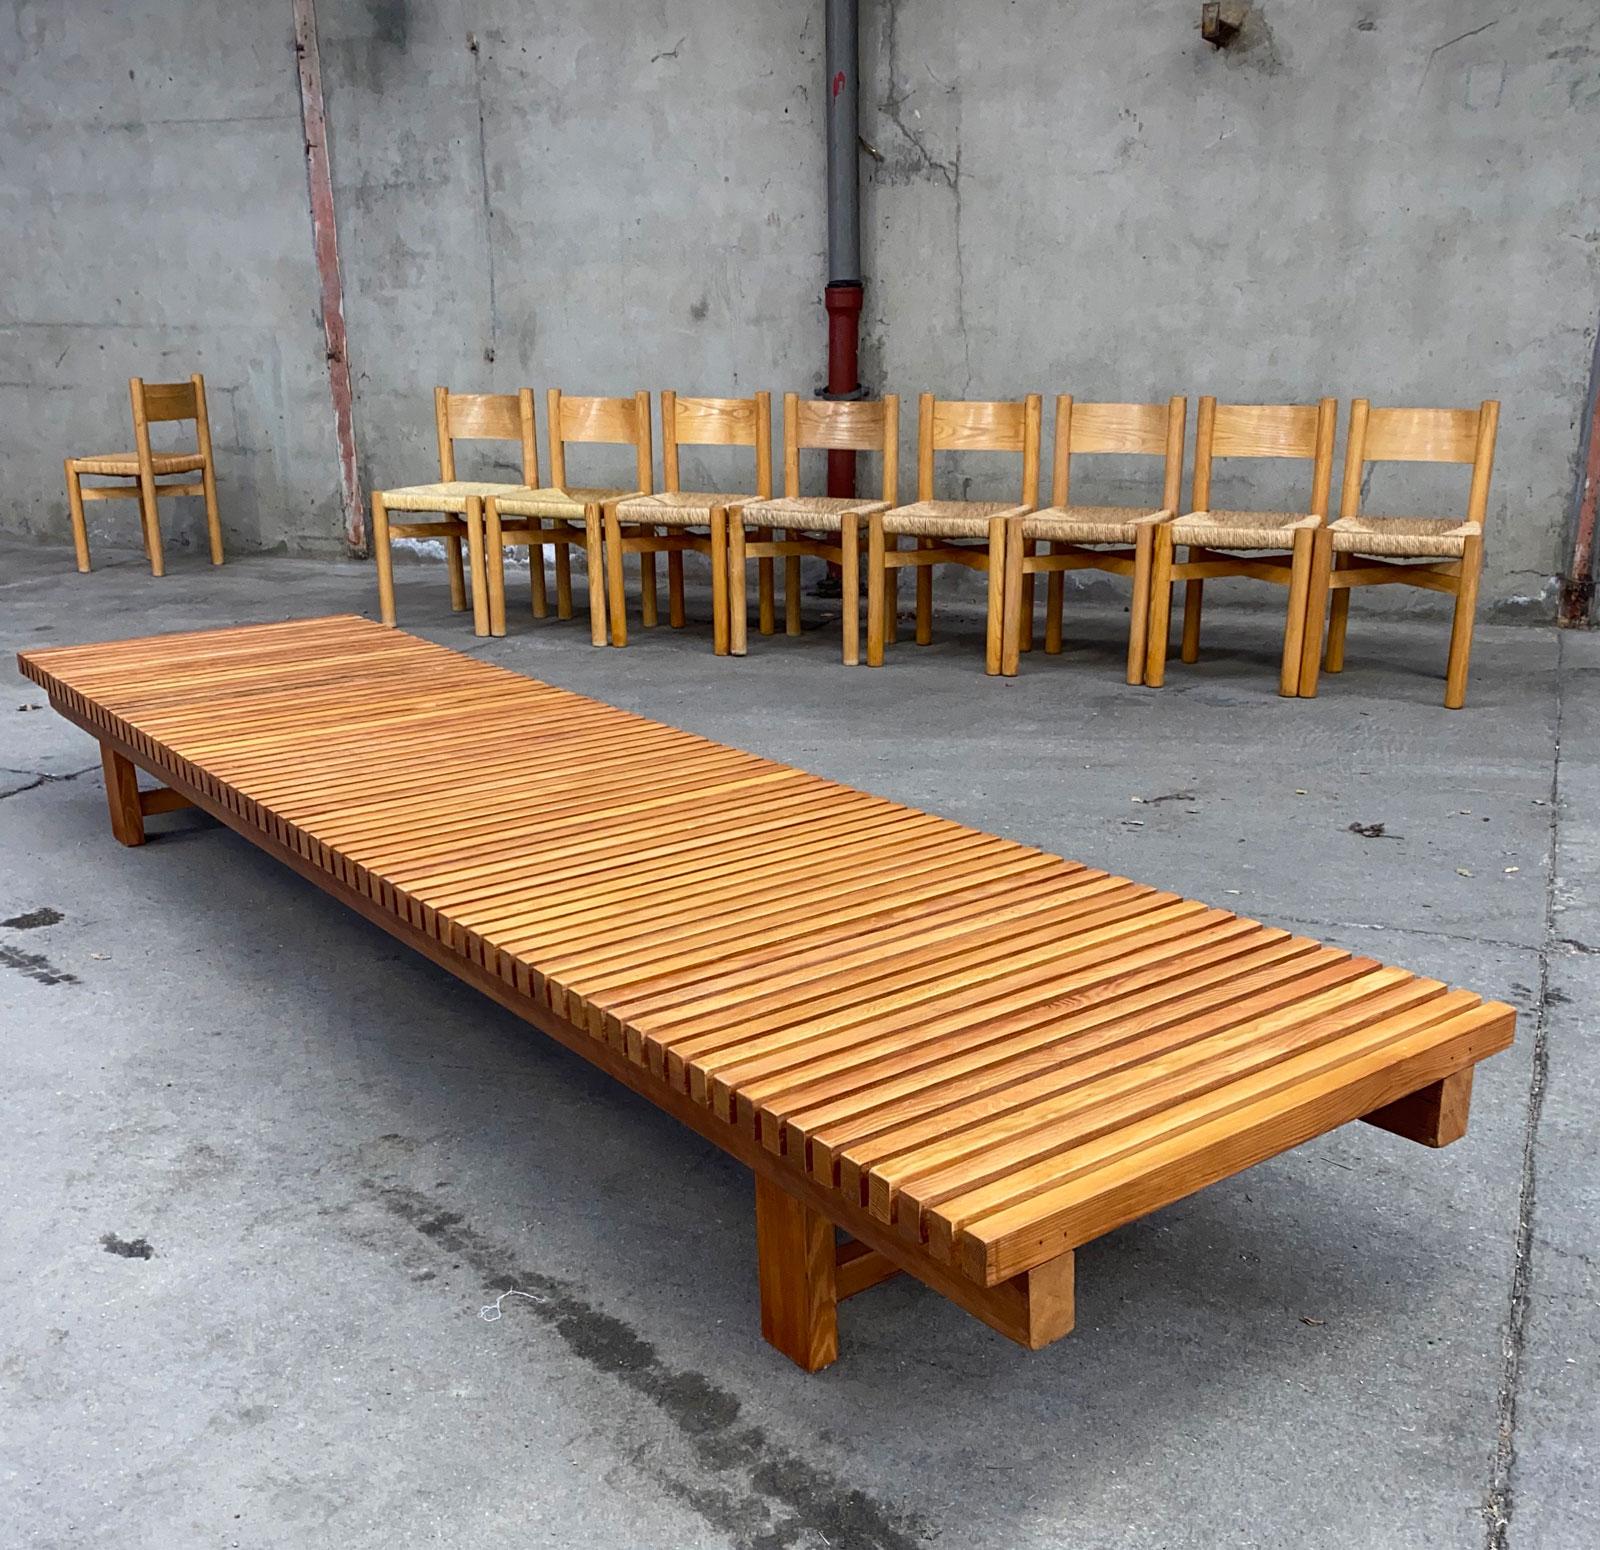 Ash Charlotte Perriand Bench from the Arcs Ski Resort